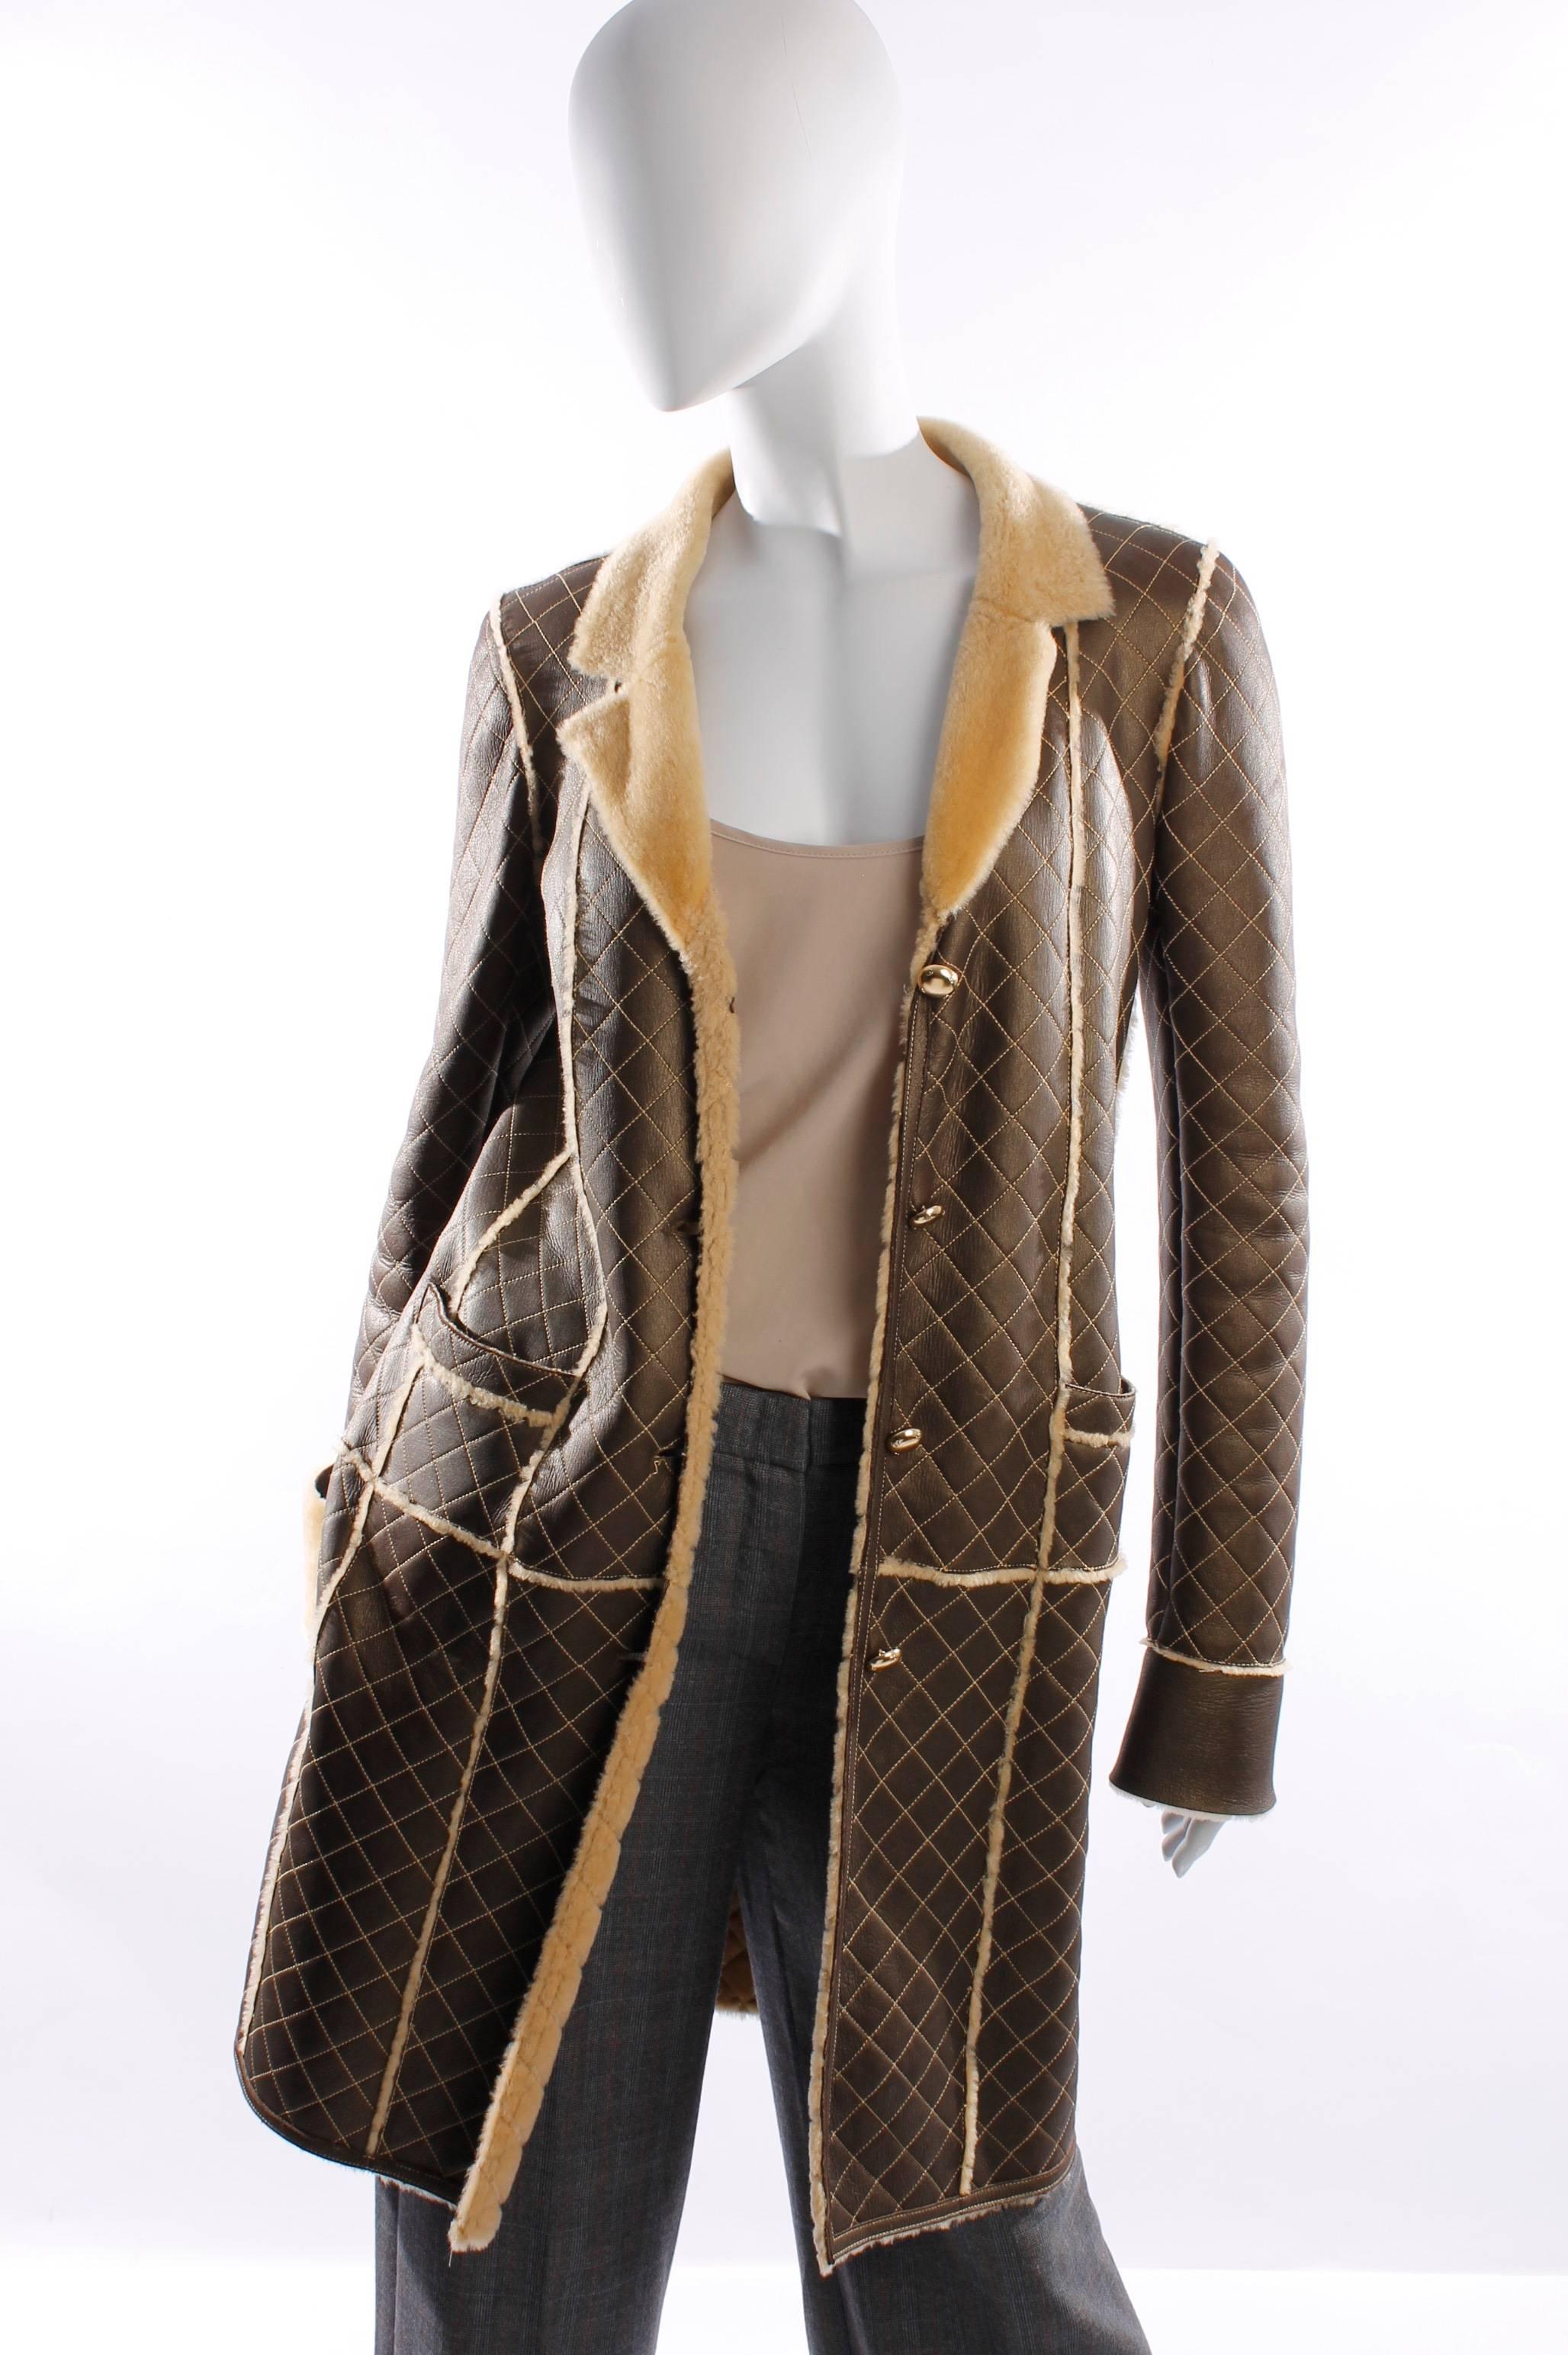 This brown leather Chanel lammy coat has a golden finish, which gives the leather a beautiful glow.

Fully quilted, closure at the front with four matte golden buttons, of course with a little CC-logo. Small lapels and tiny pockets. A loose belt